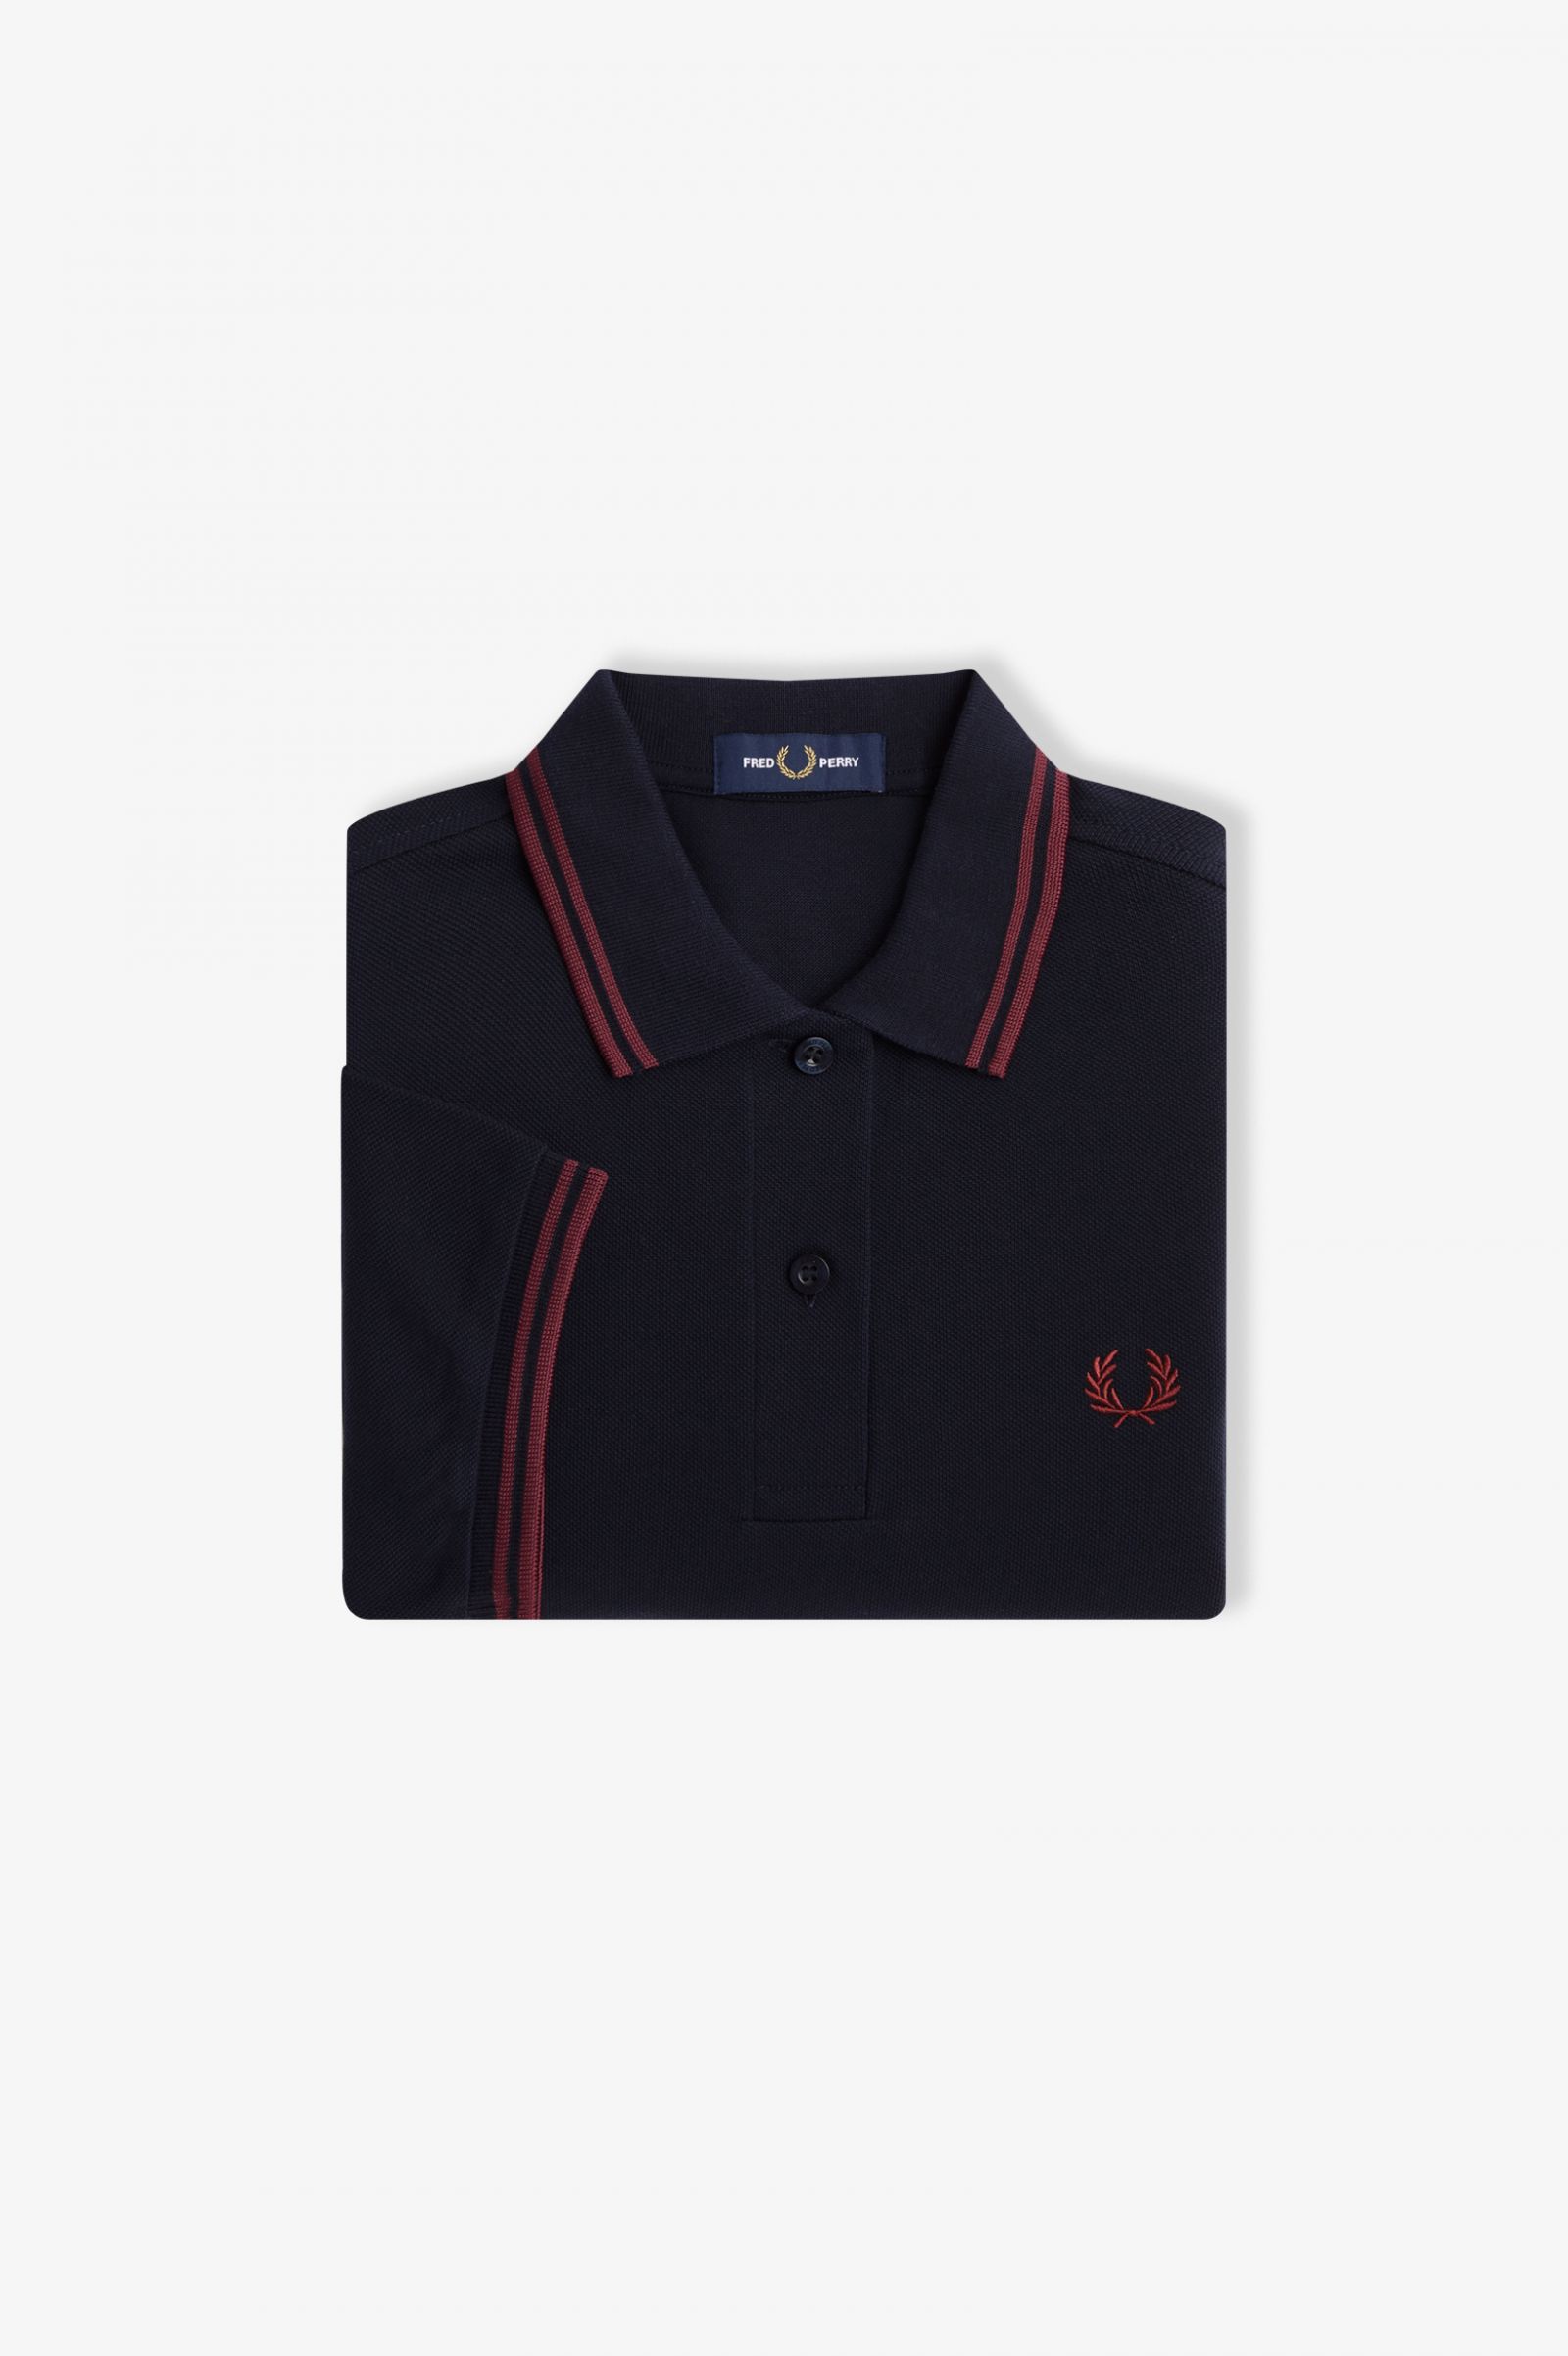 G3600 - Navy / Oxblood / Oxblood | The Fred Perry Shirt | Women's Short ...